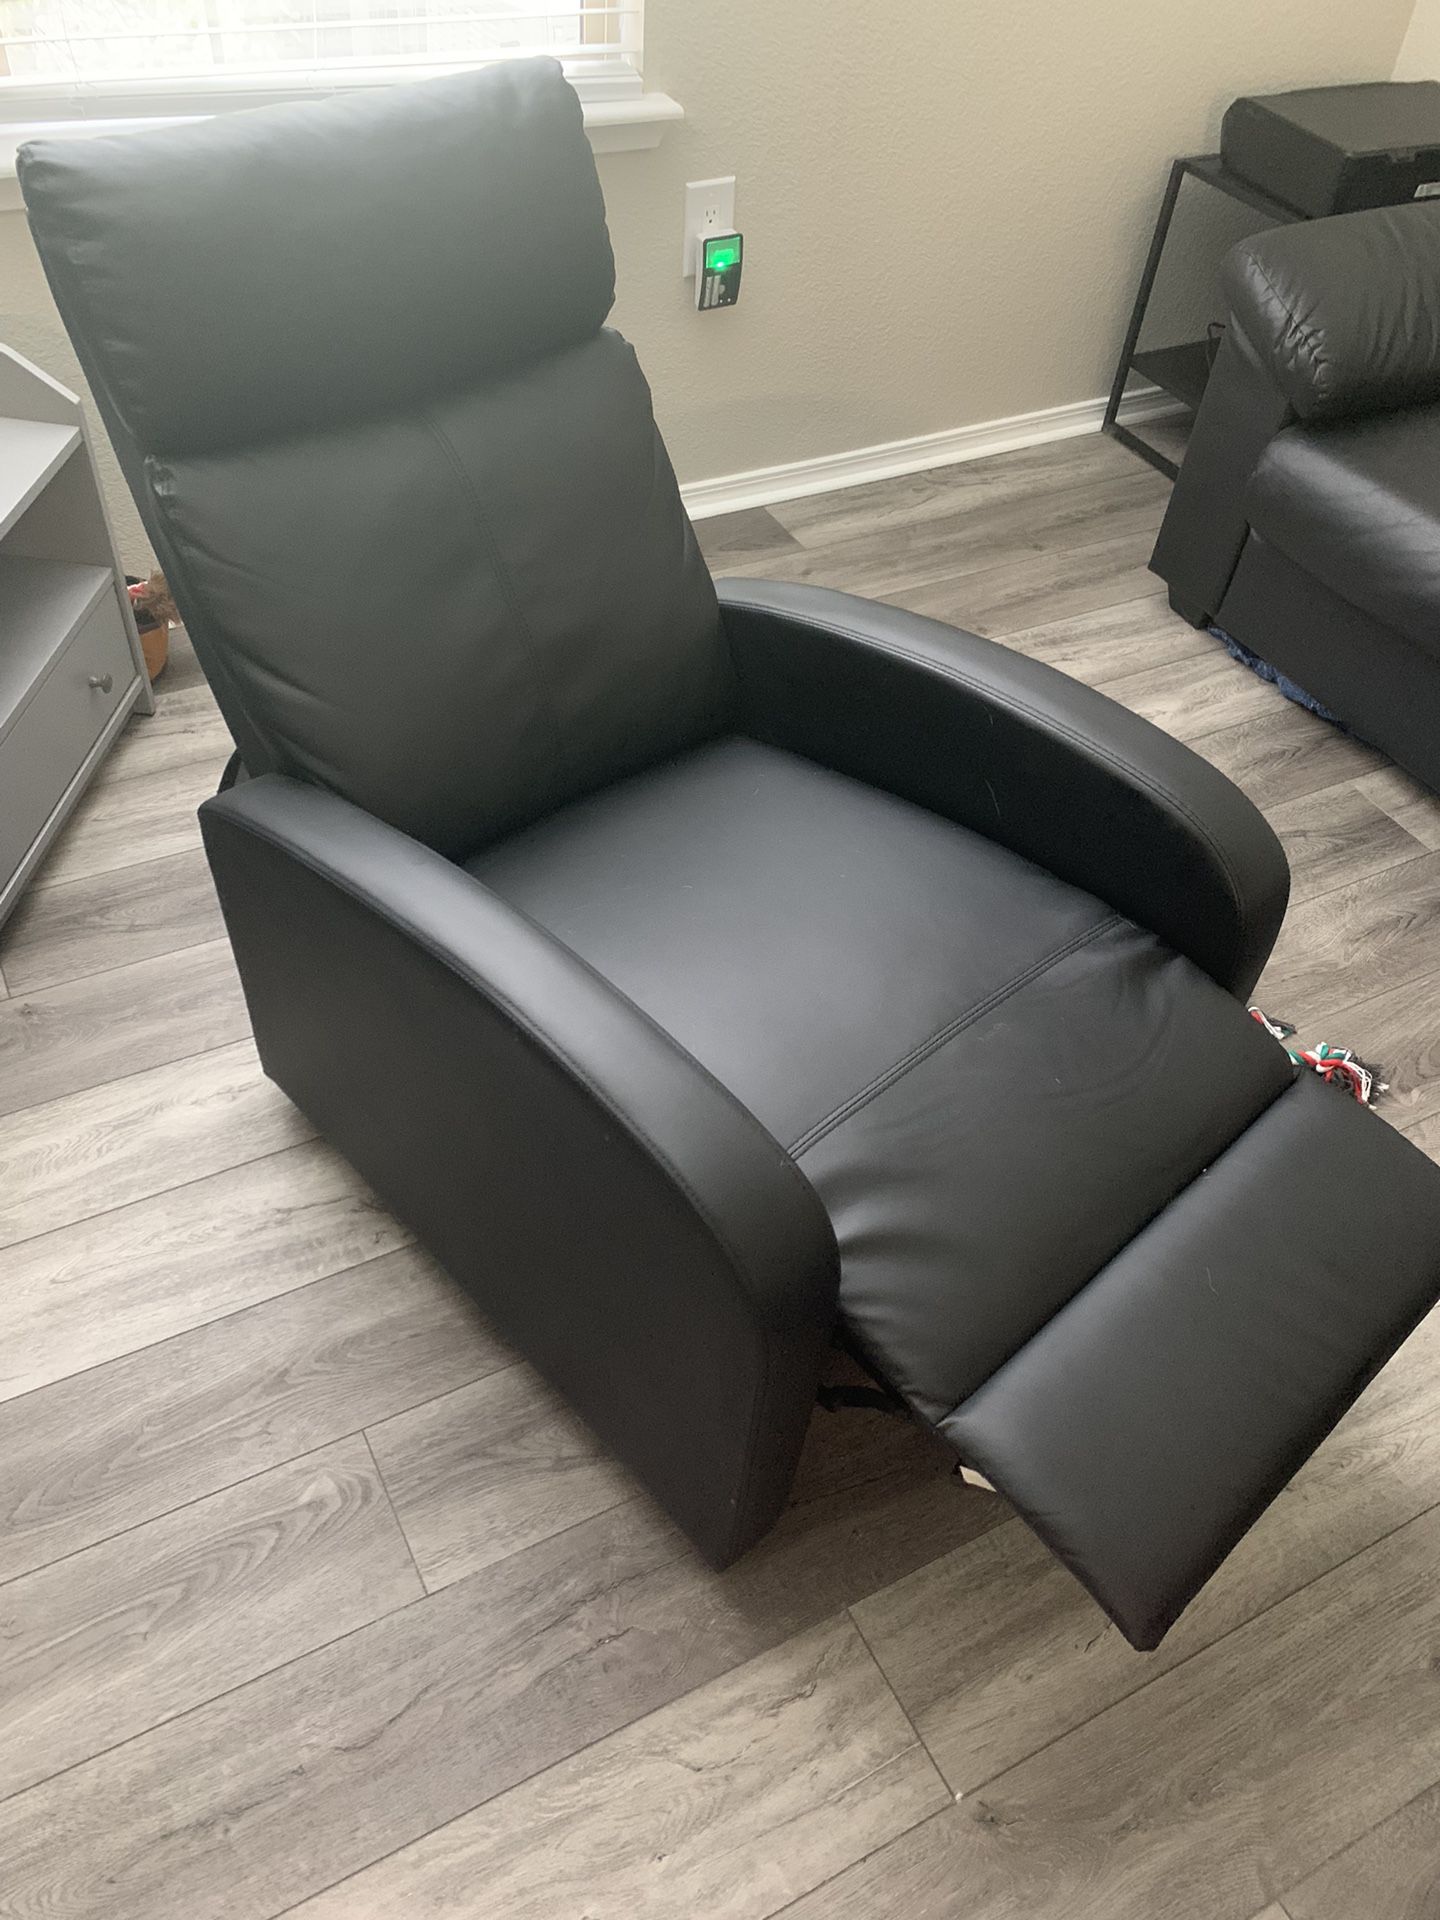 $25 Recliner Chairs